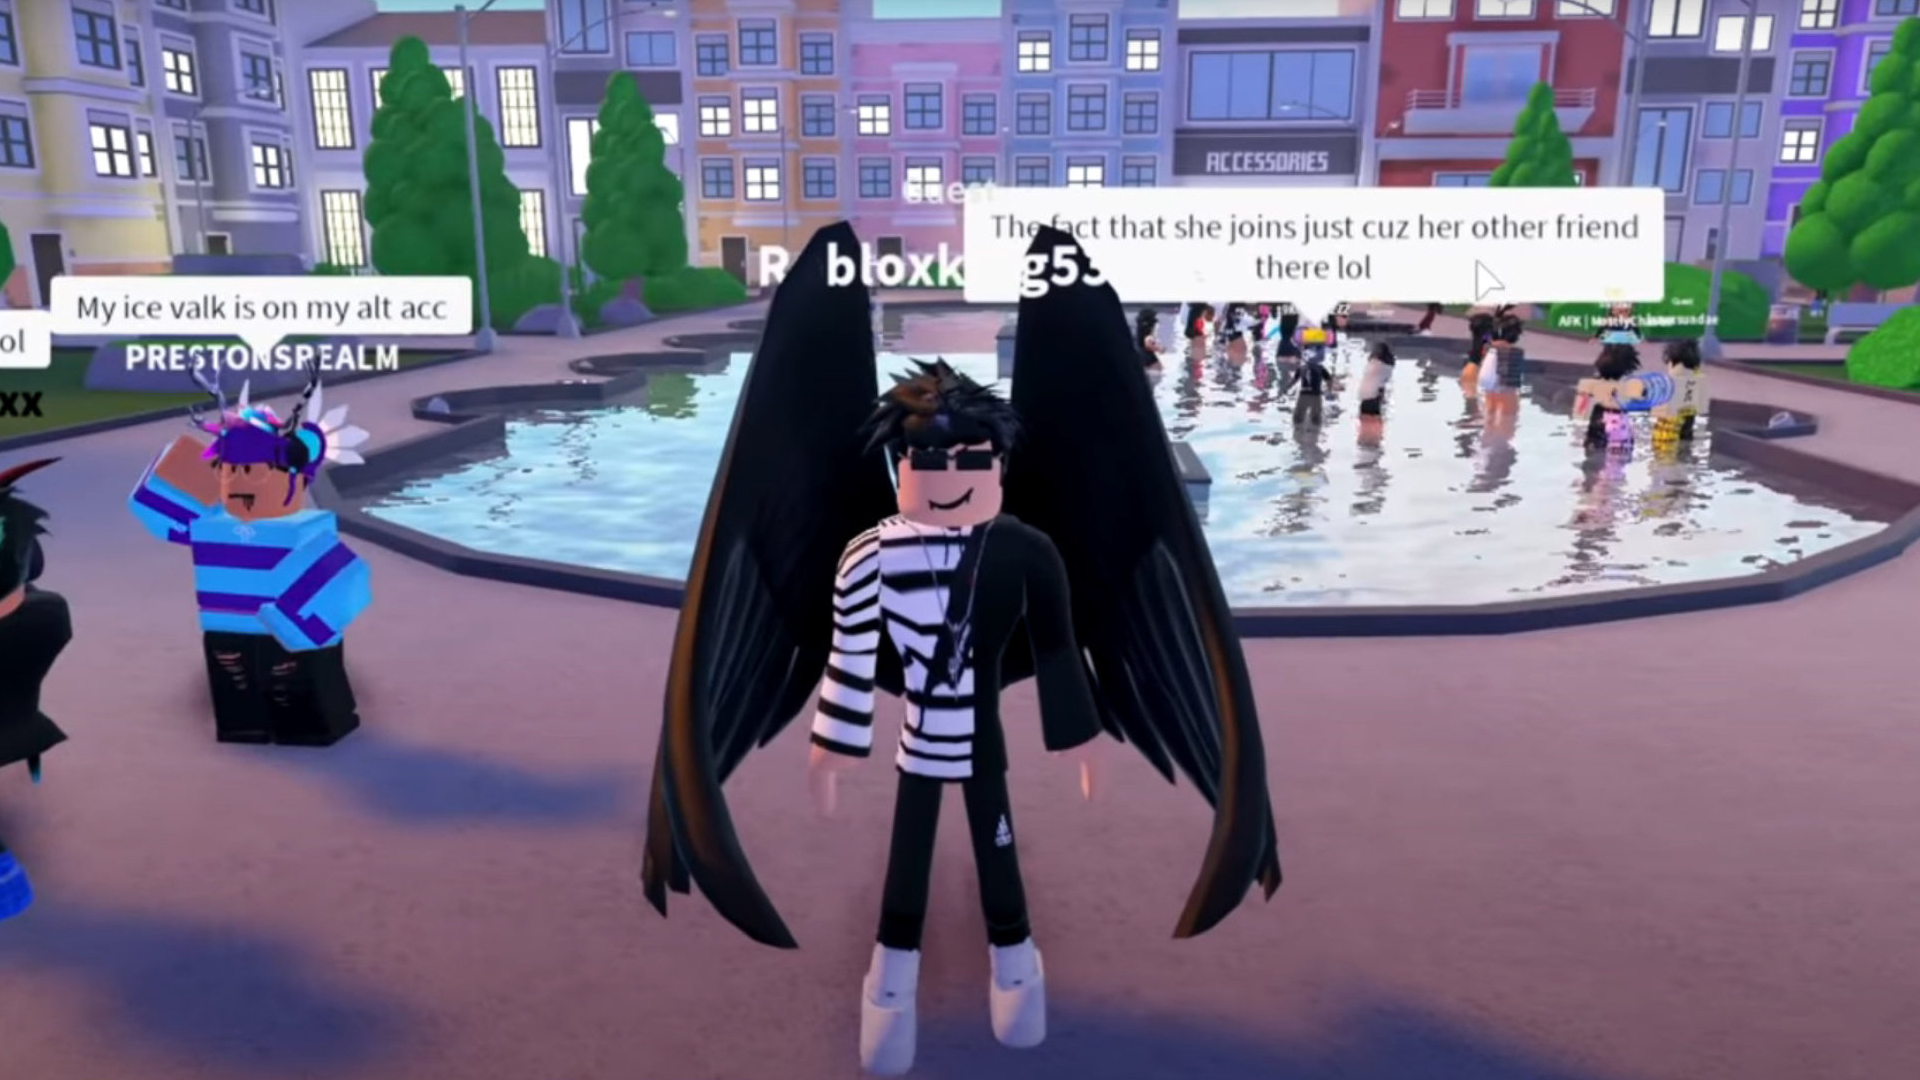 so I became a slender in roblox 